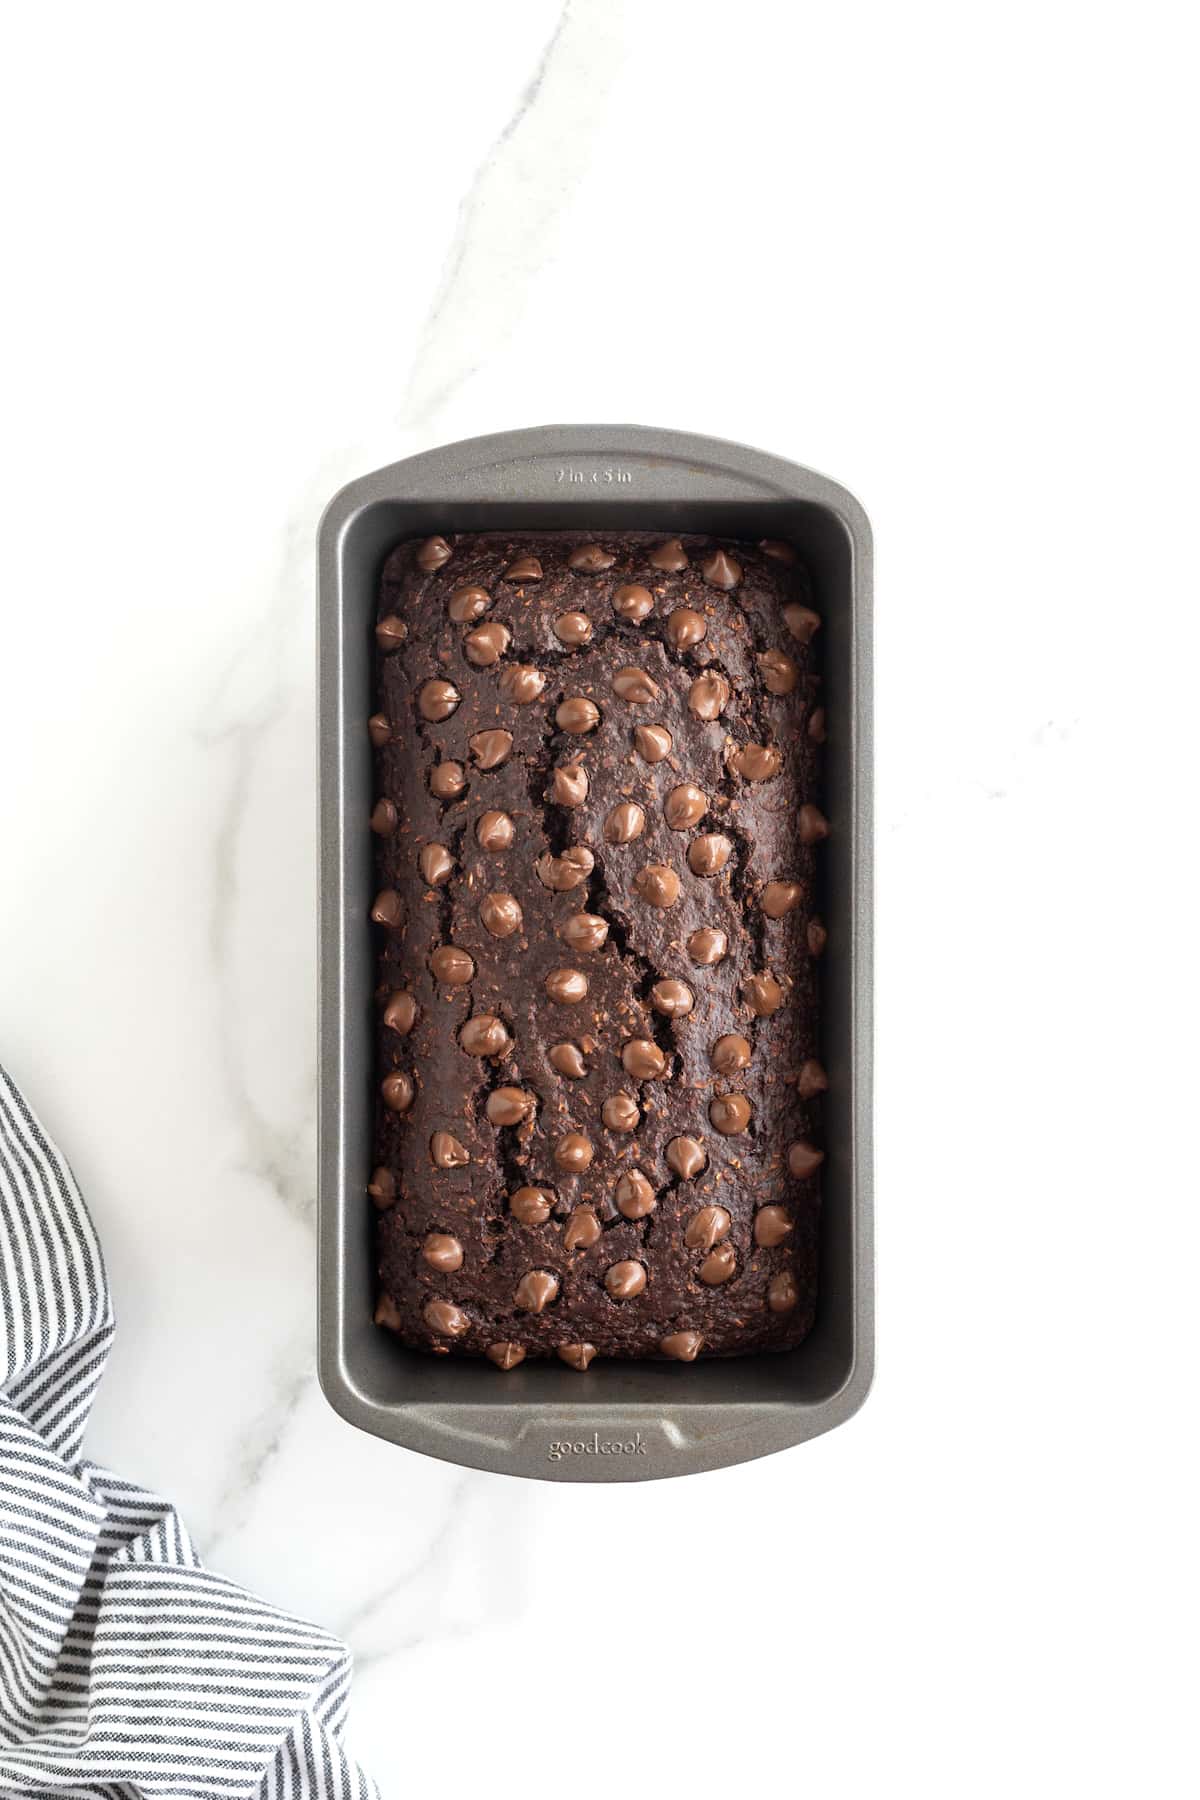 A baked loaf of chocolate banana bread studded with chocolate chips in a dark metal loaf pan on a white marble counter.